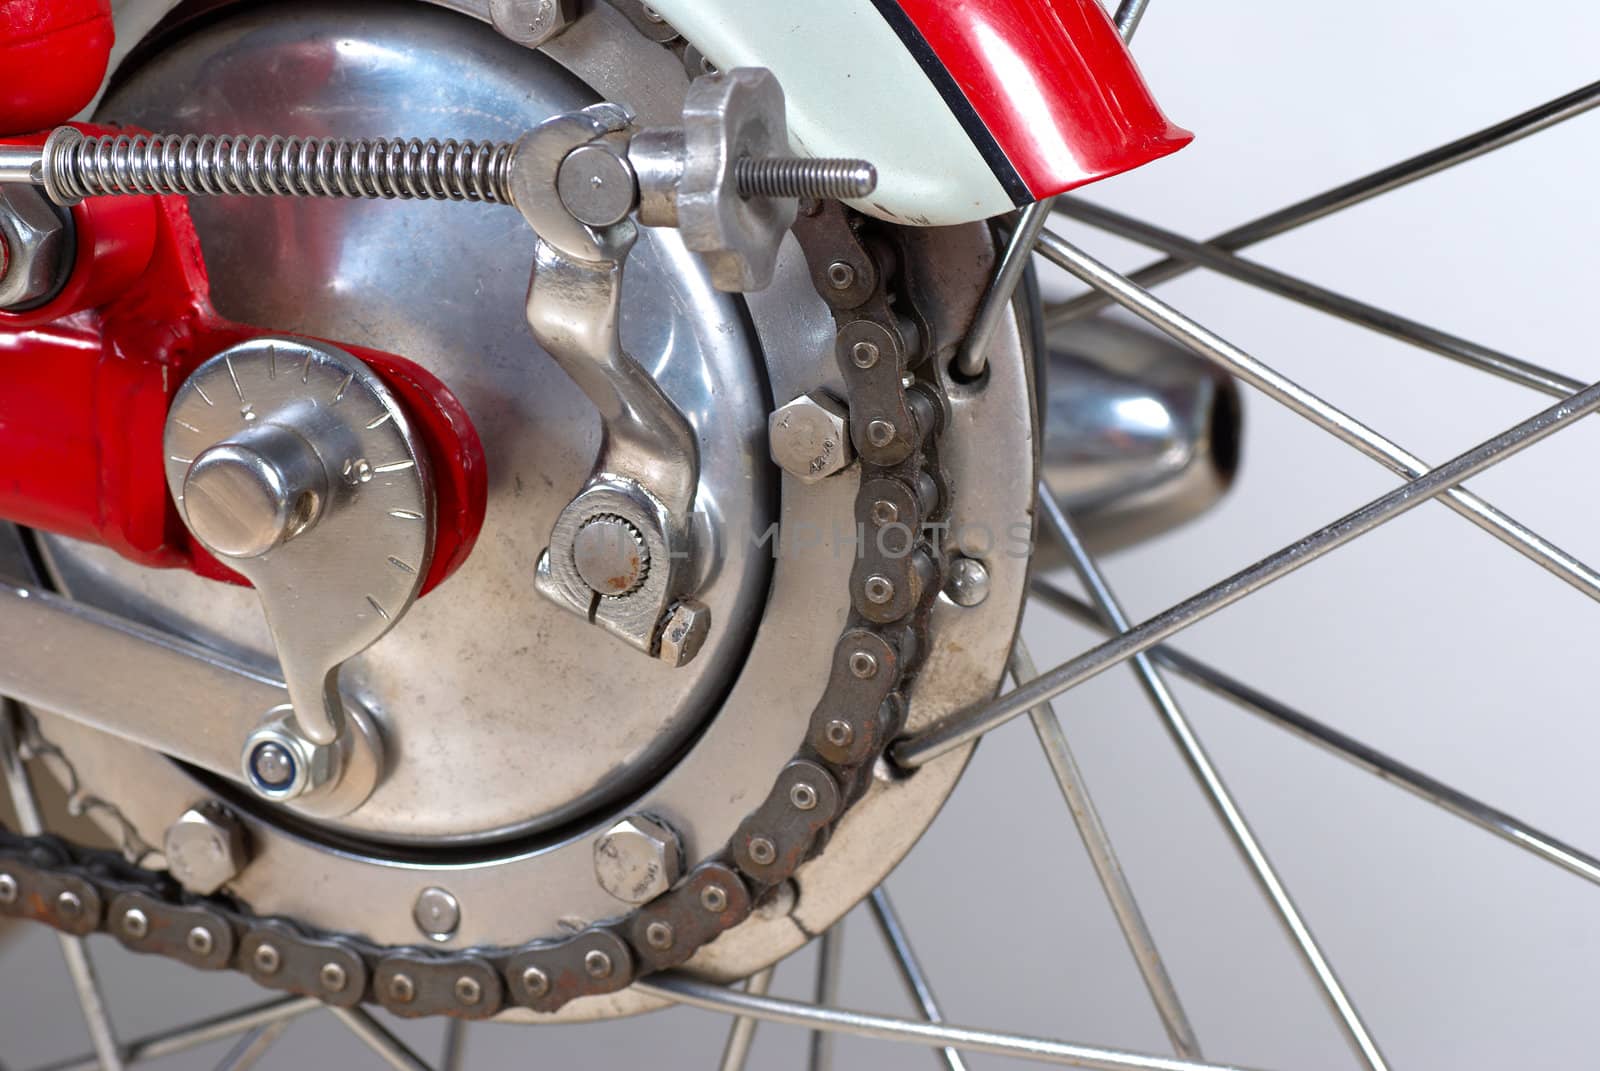 Detail take of a classic motorcycle chain drive